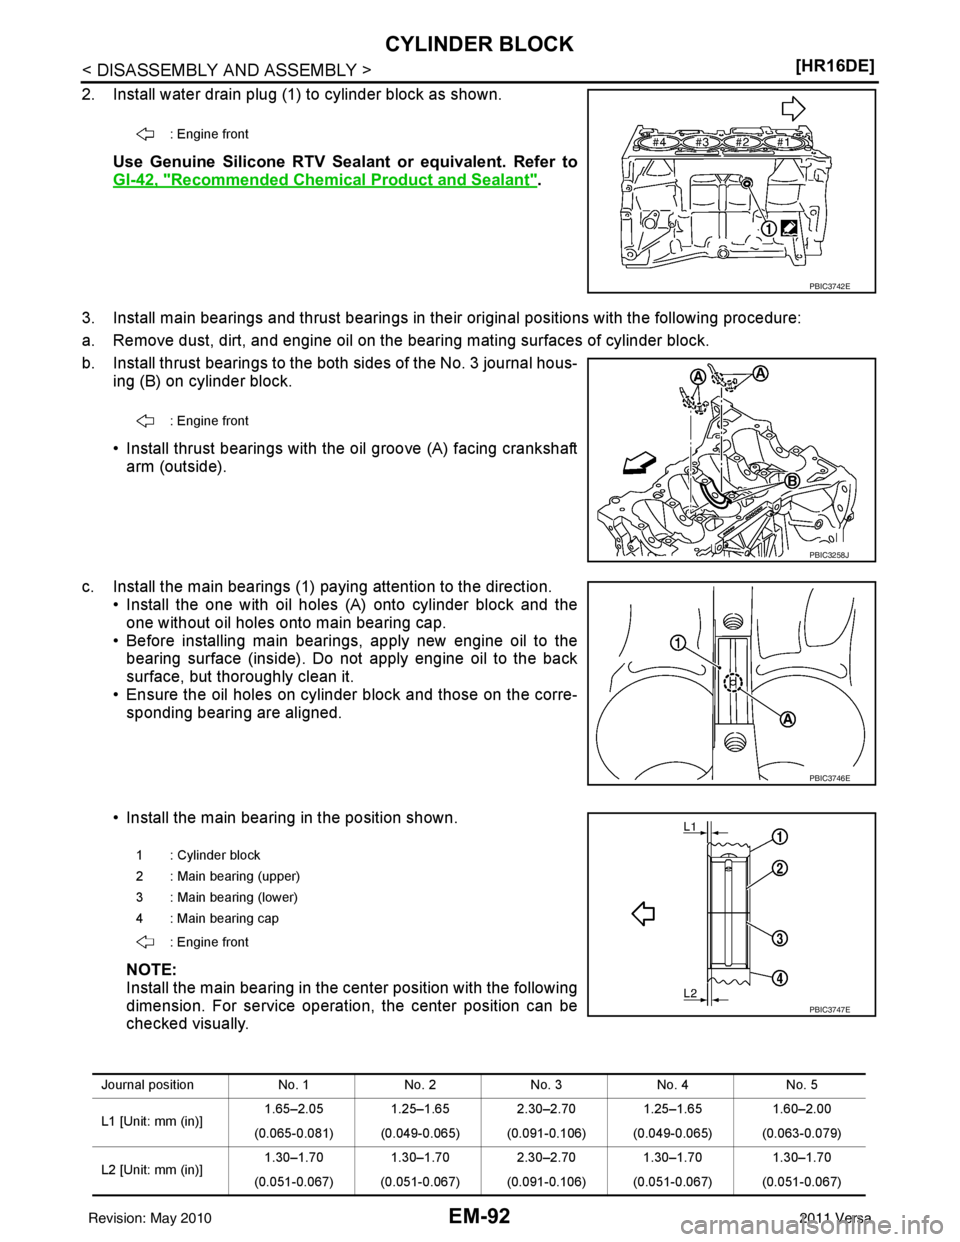 NISSAN LATIO 2011  Service Repair Manual EM-92
< DISASSEMBLY AND ASSEMBLY >[HR16DE]
CYLINDER BLOCK
2. Install water drain plug (1) to cylinder block as shown. 
Use Genuine Silicone RTV Sealant or equivalent. Refer to
GI-42, "
Recommended Che